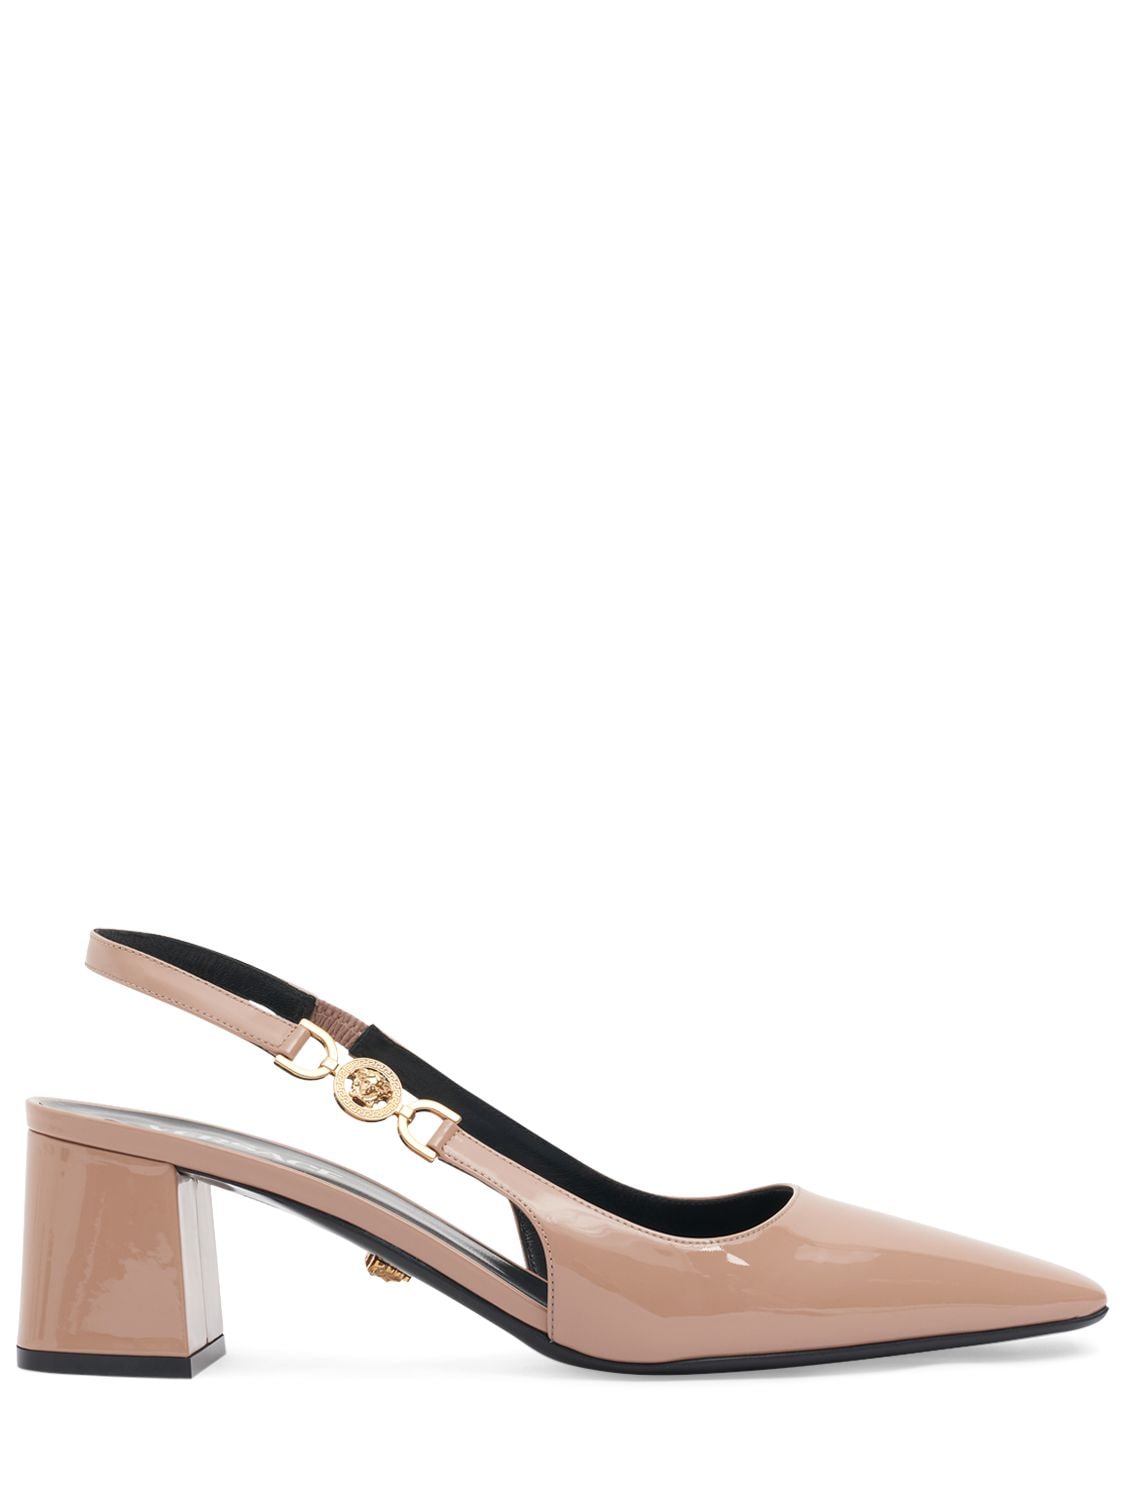 Versace 55mm Patent Leather Slingback Pumps In Blush